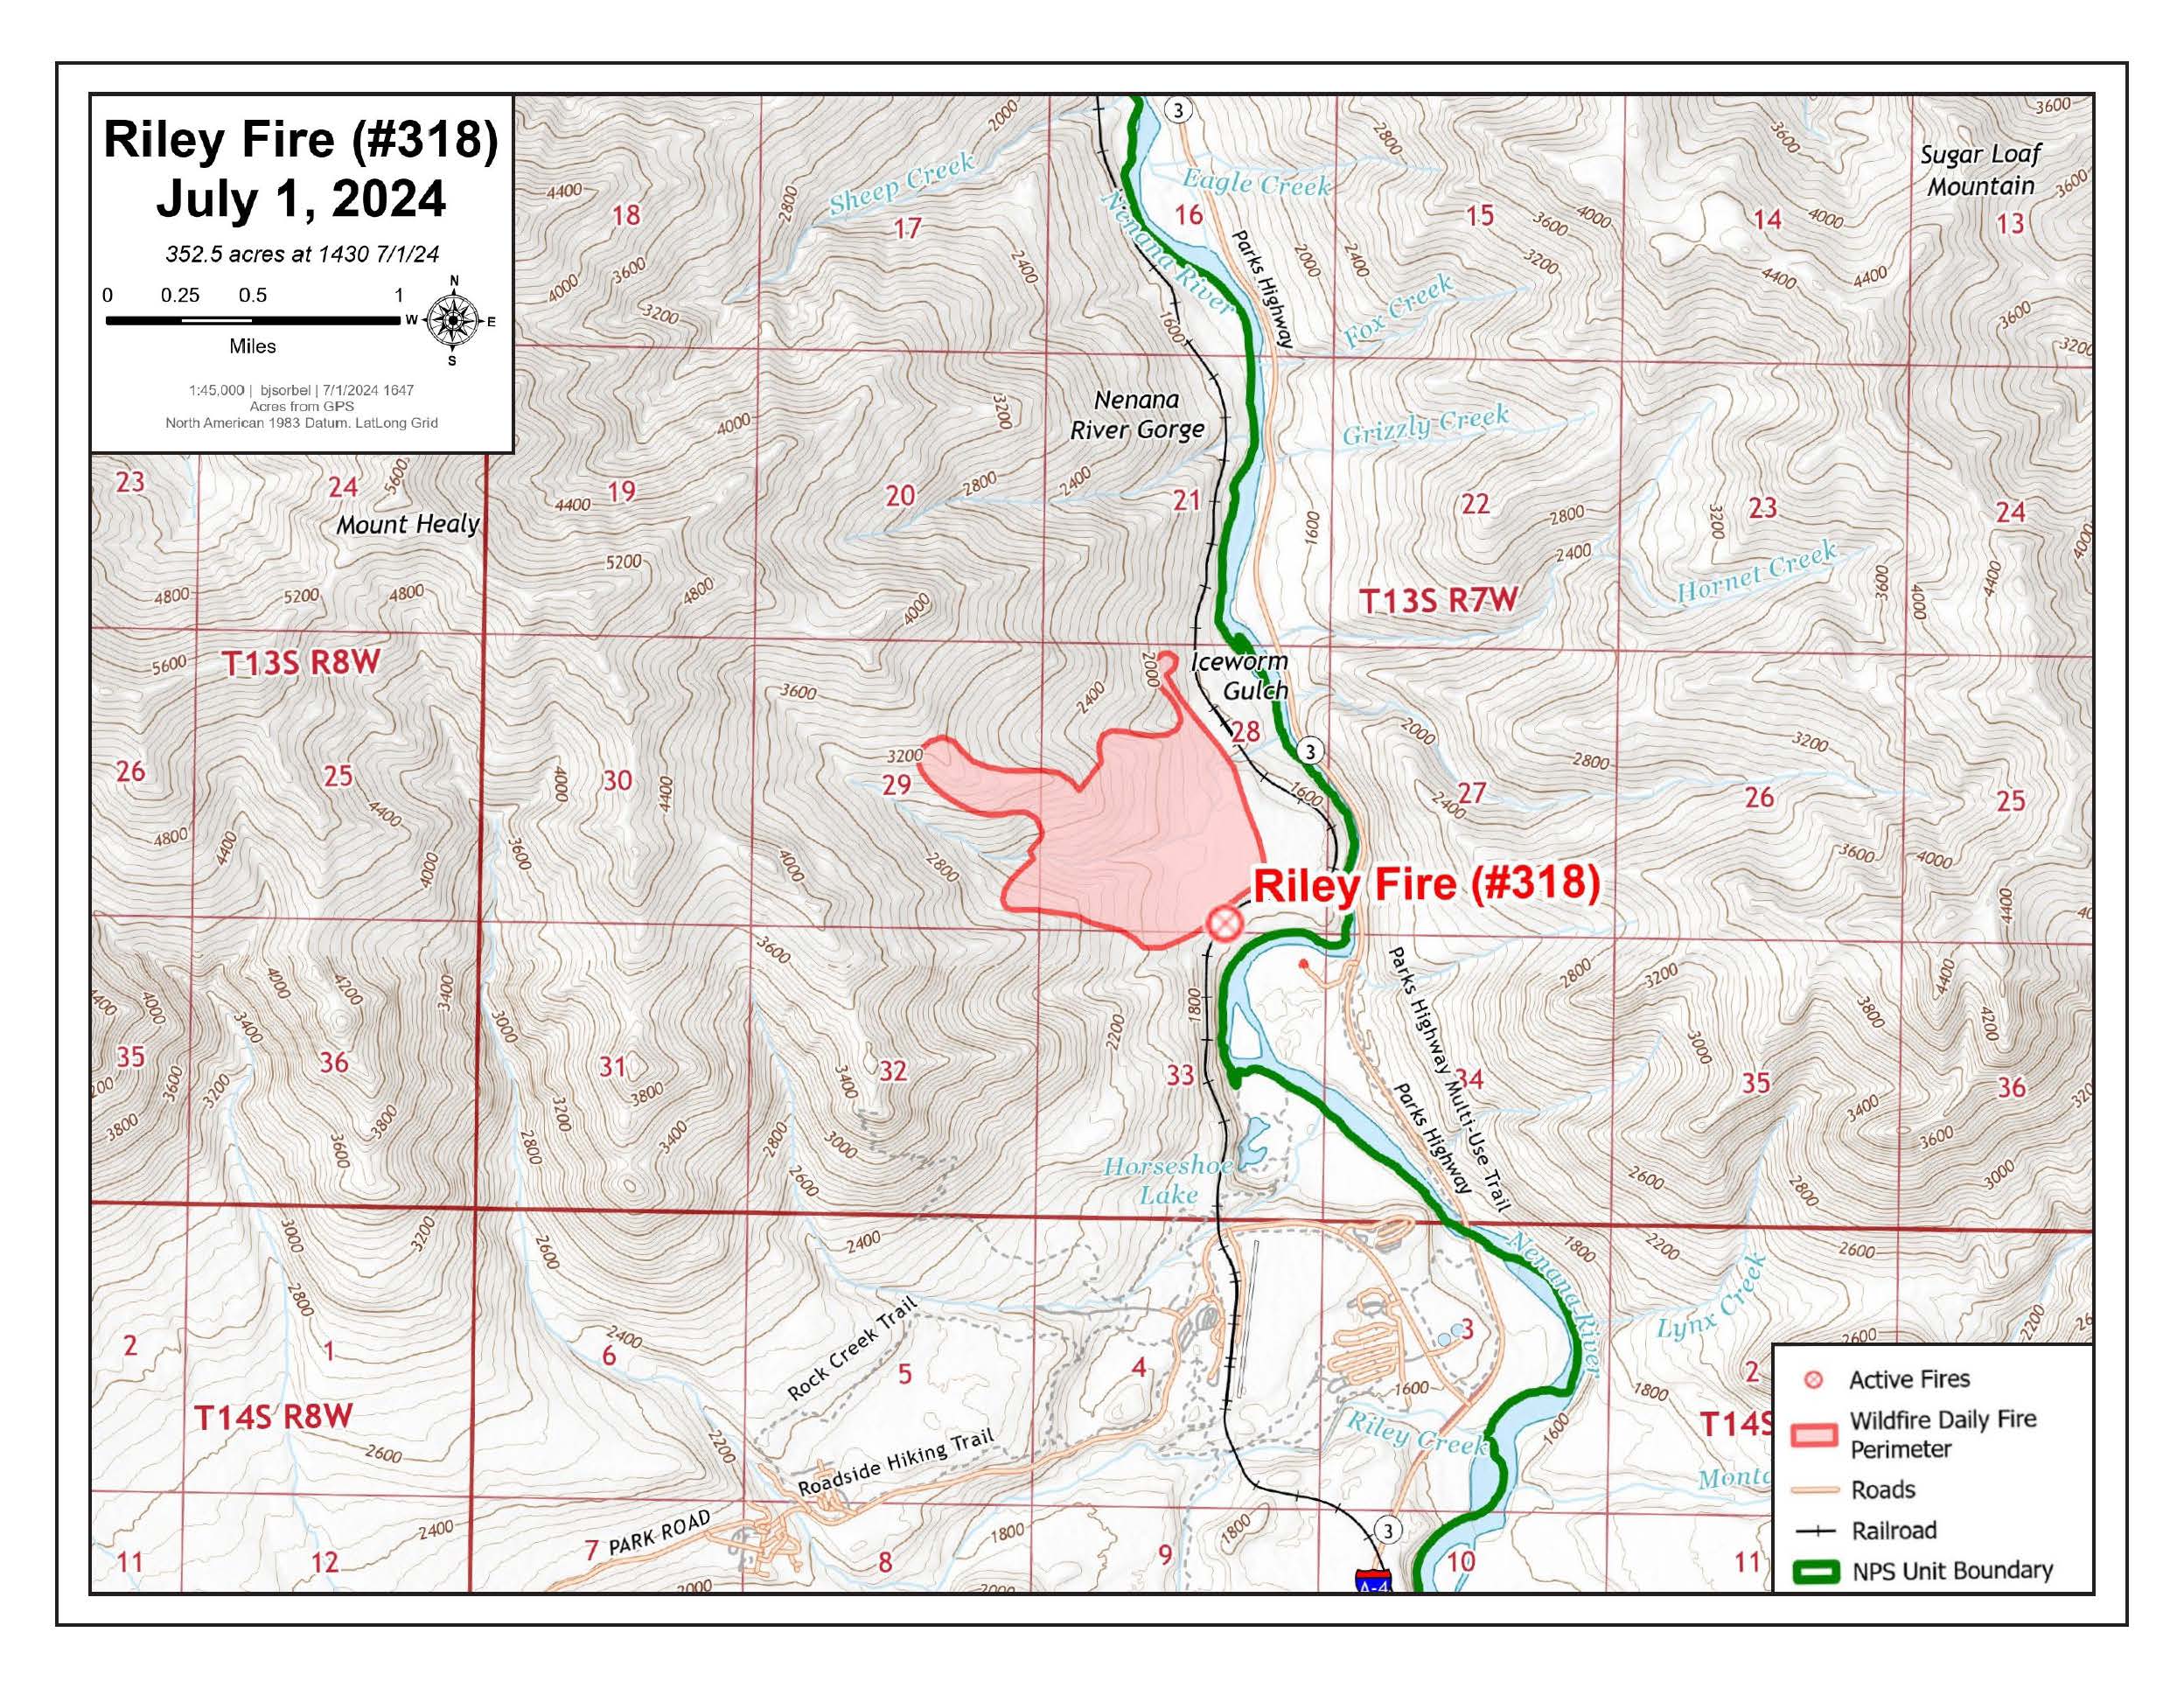 A topographic map of the park entrance area to the south and Nanana River Gorge to the north. A red shape marks the fire location just west of the railroad tracks across the Nenana River from a commercial area.